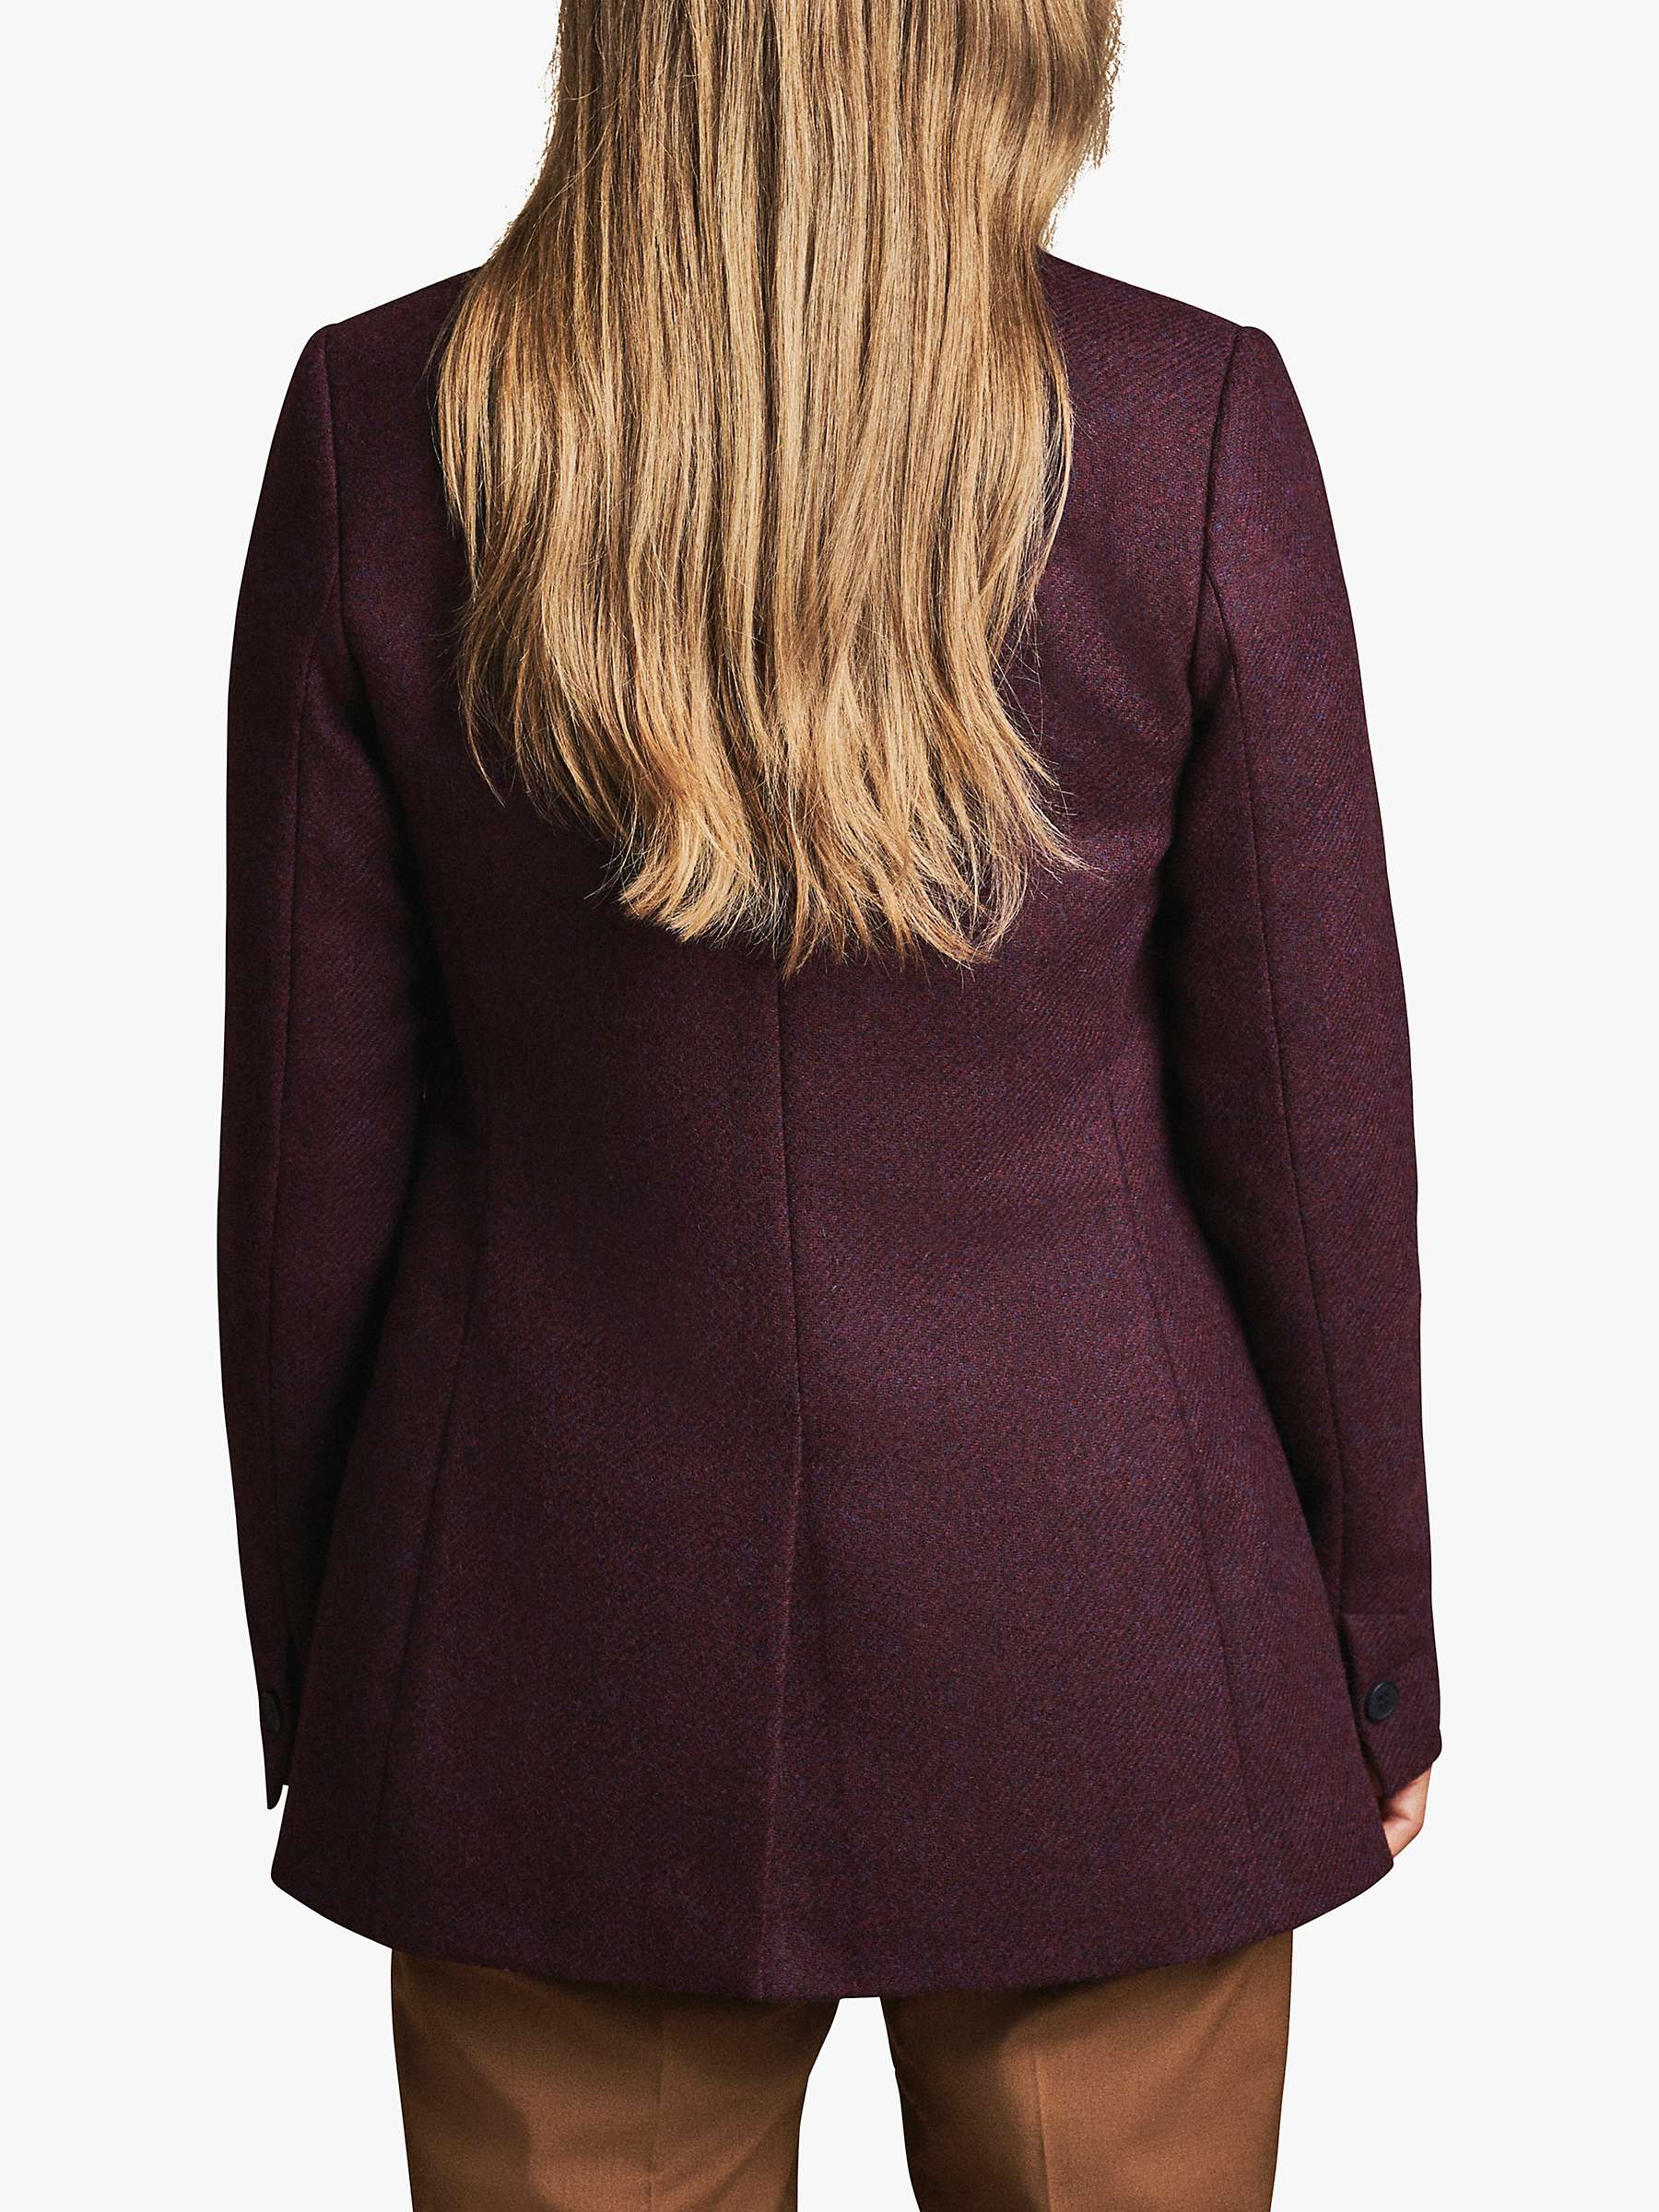 Buy Pure Collection Wool Blazer, Burgundy Online at johnlewis.com